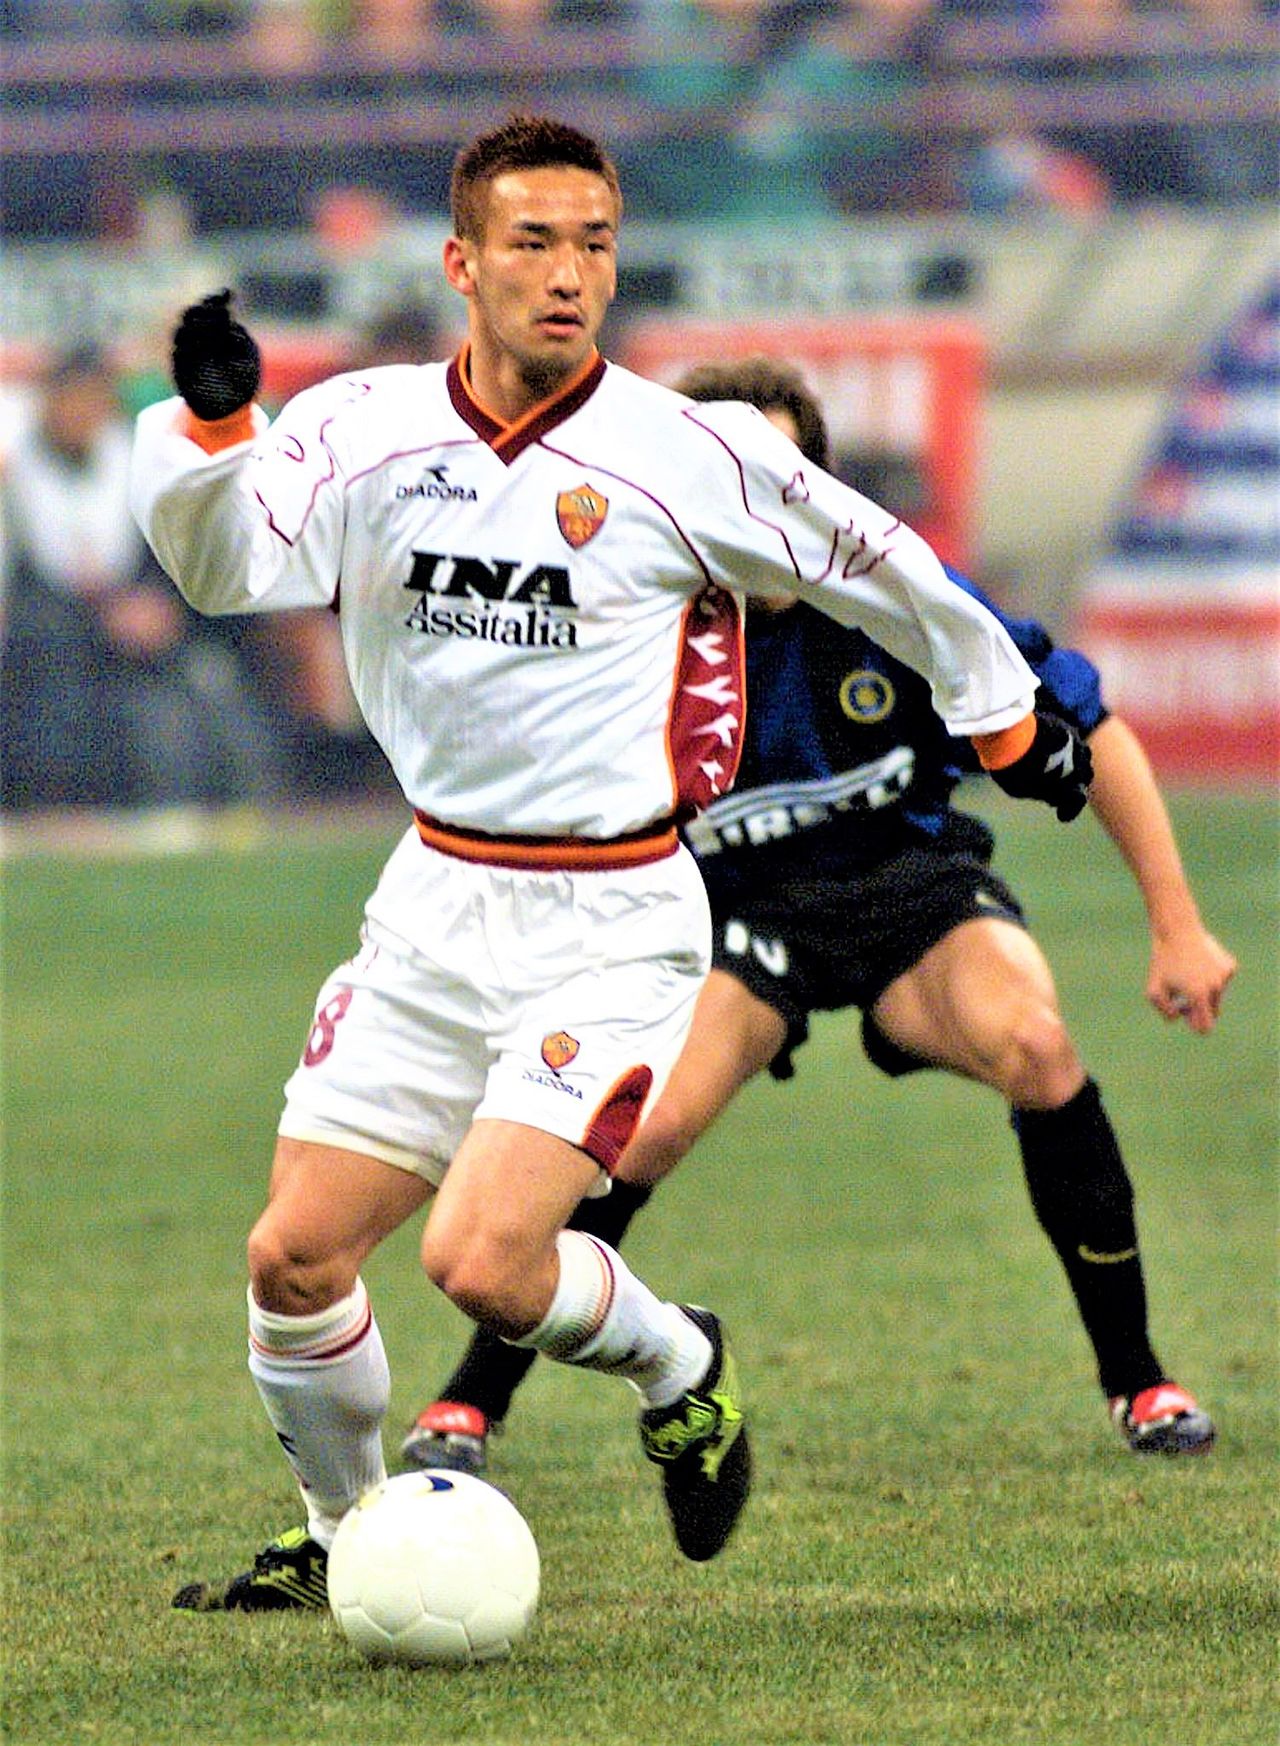 Nakata Hidetoshi after moving to powerhouse Roma plays in a match against Milan on January 30, 2001. (© AFP/Jiji)